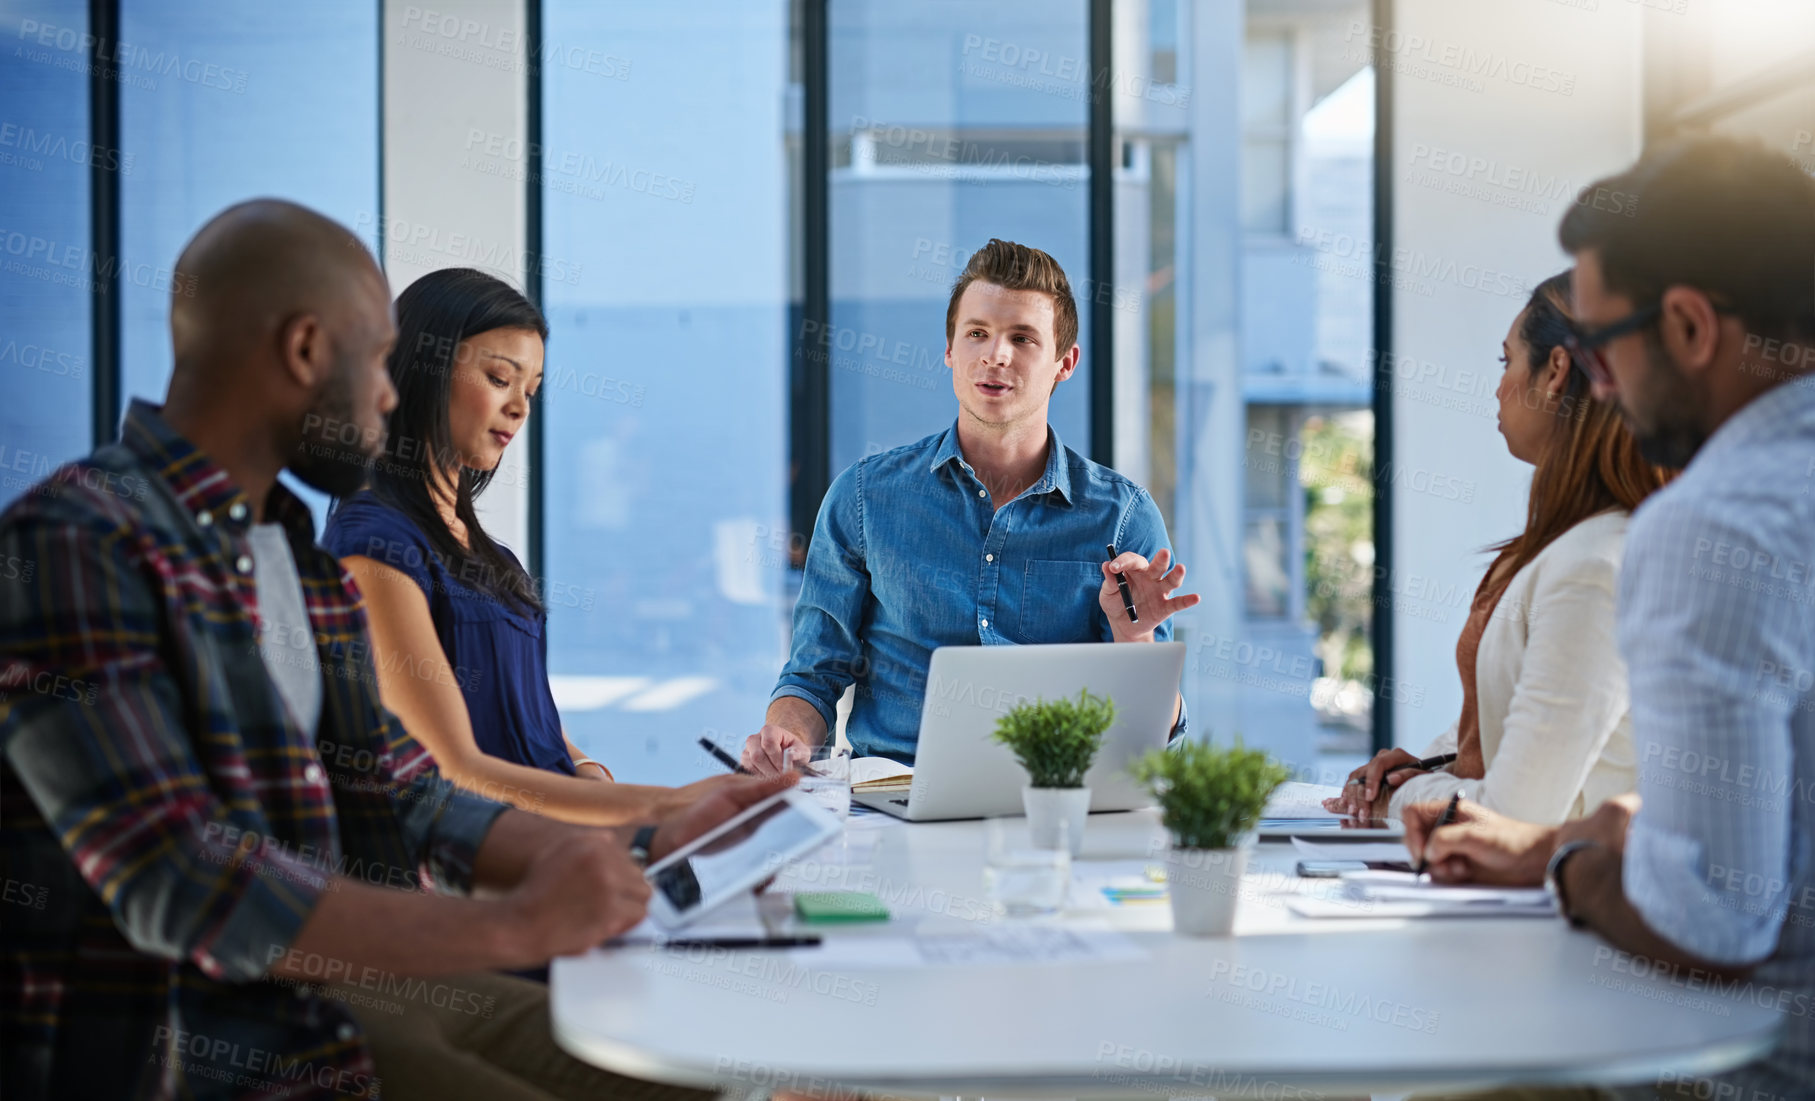 Buy stock photo Shot of a group of young businesspeople discussing ideas with each other during a meeting in a modern office